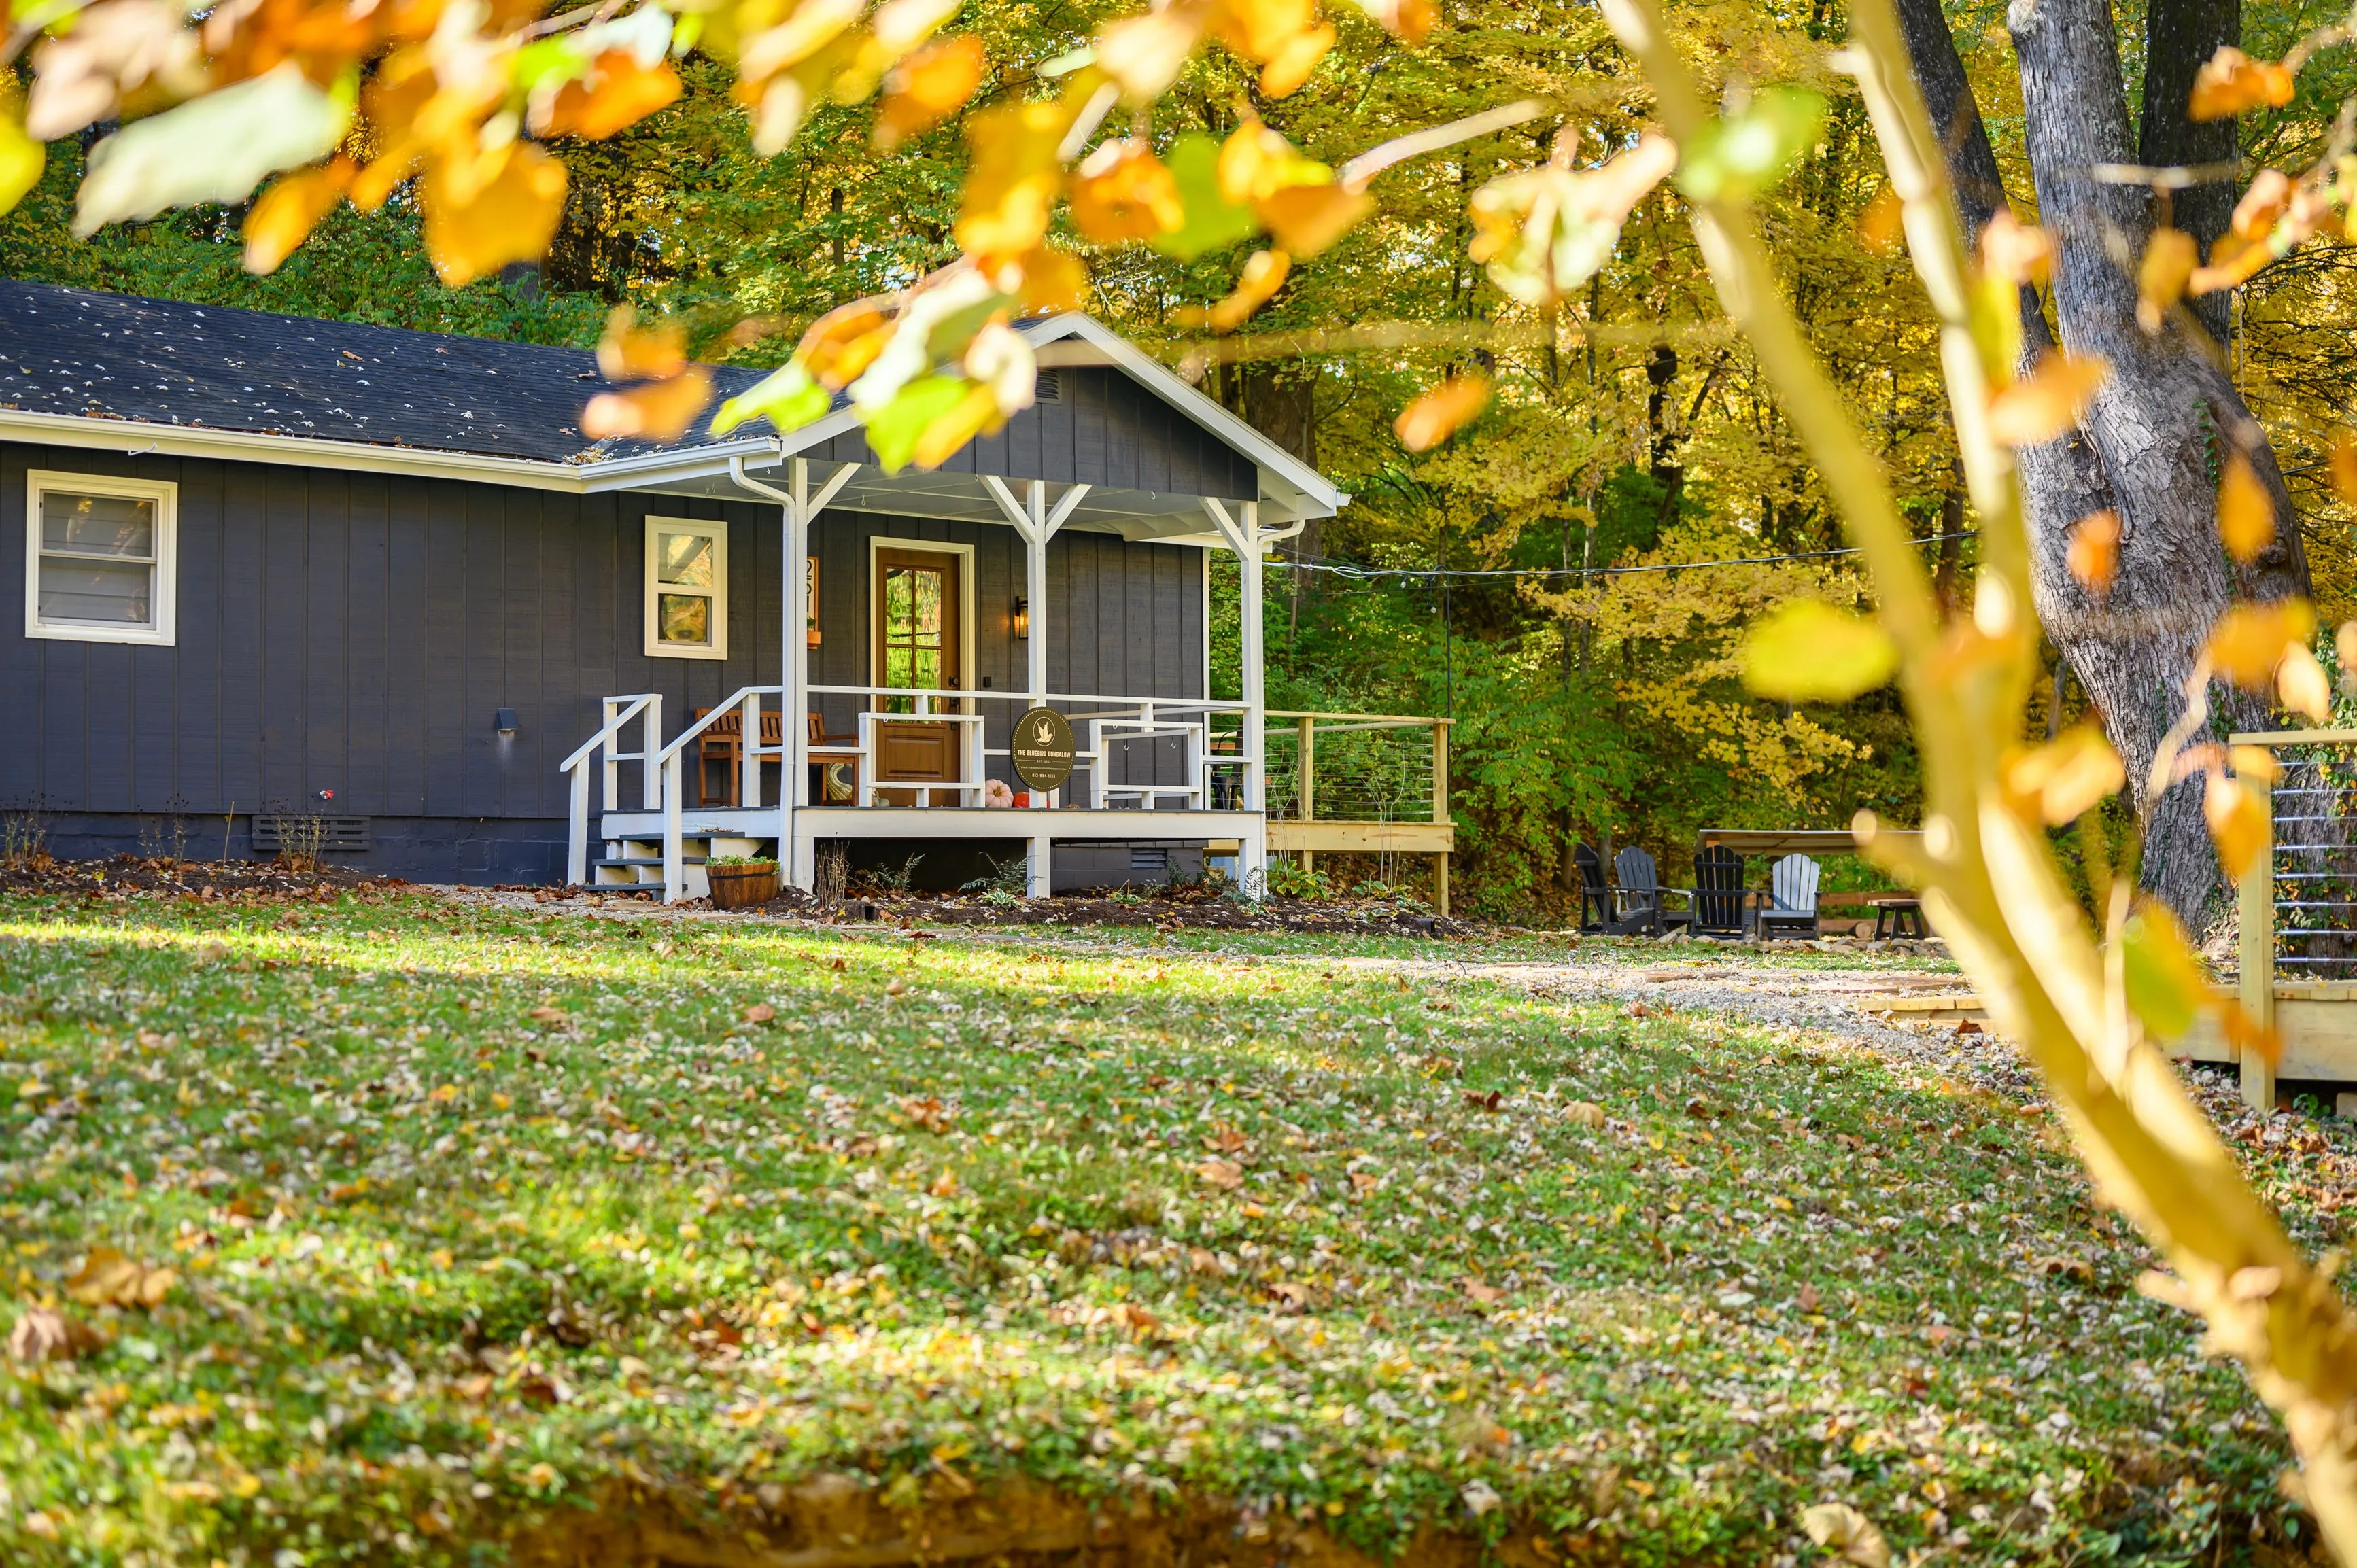 Cozy blue house with white trim and front porch surrounded by autumn foliage and a lawn covered with fallen leaves.